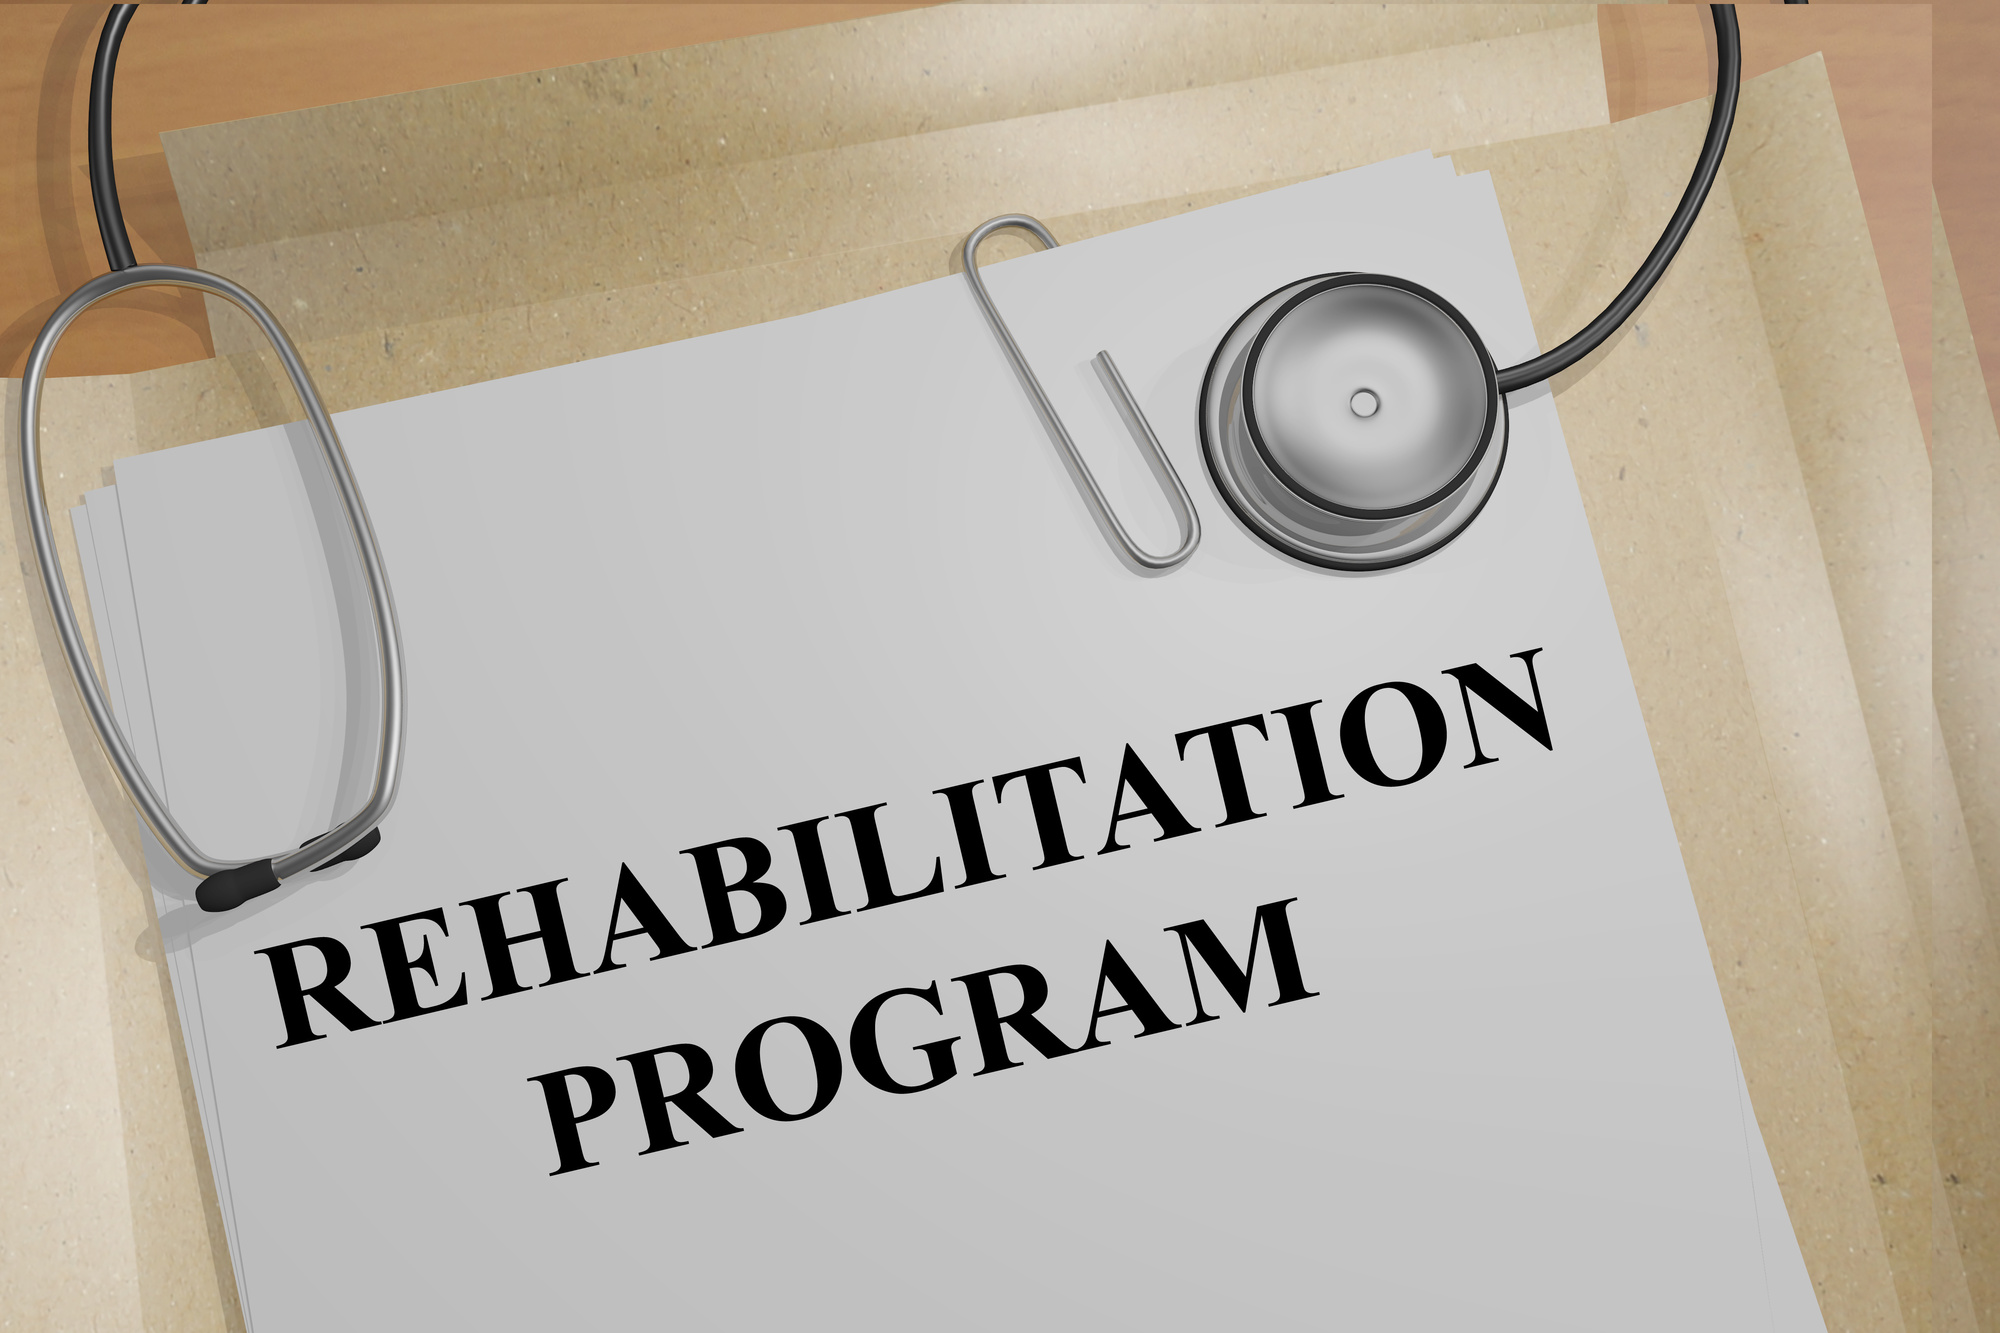 Outpatient vs. Inpatient Rehab: Which Is Best for Me?